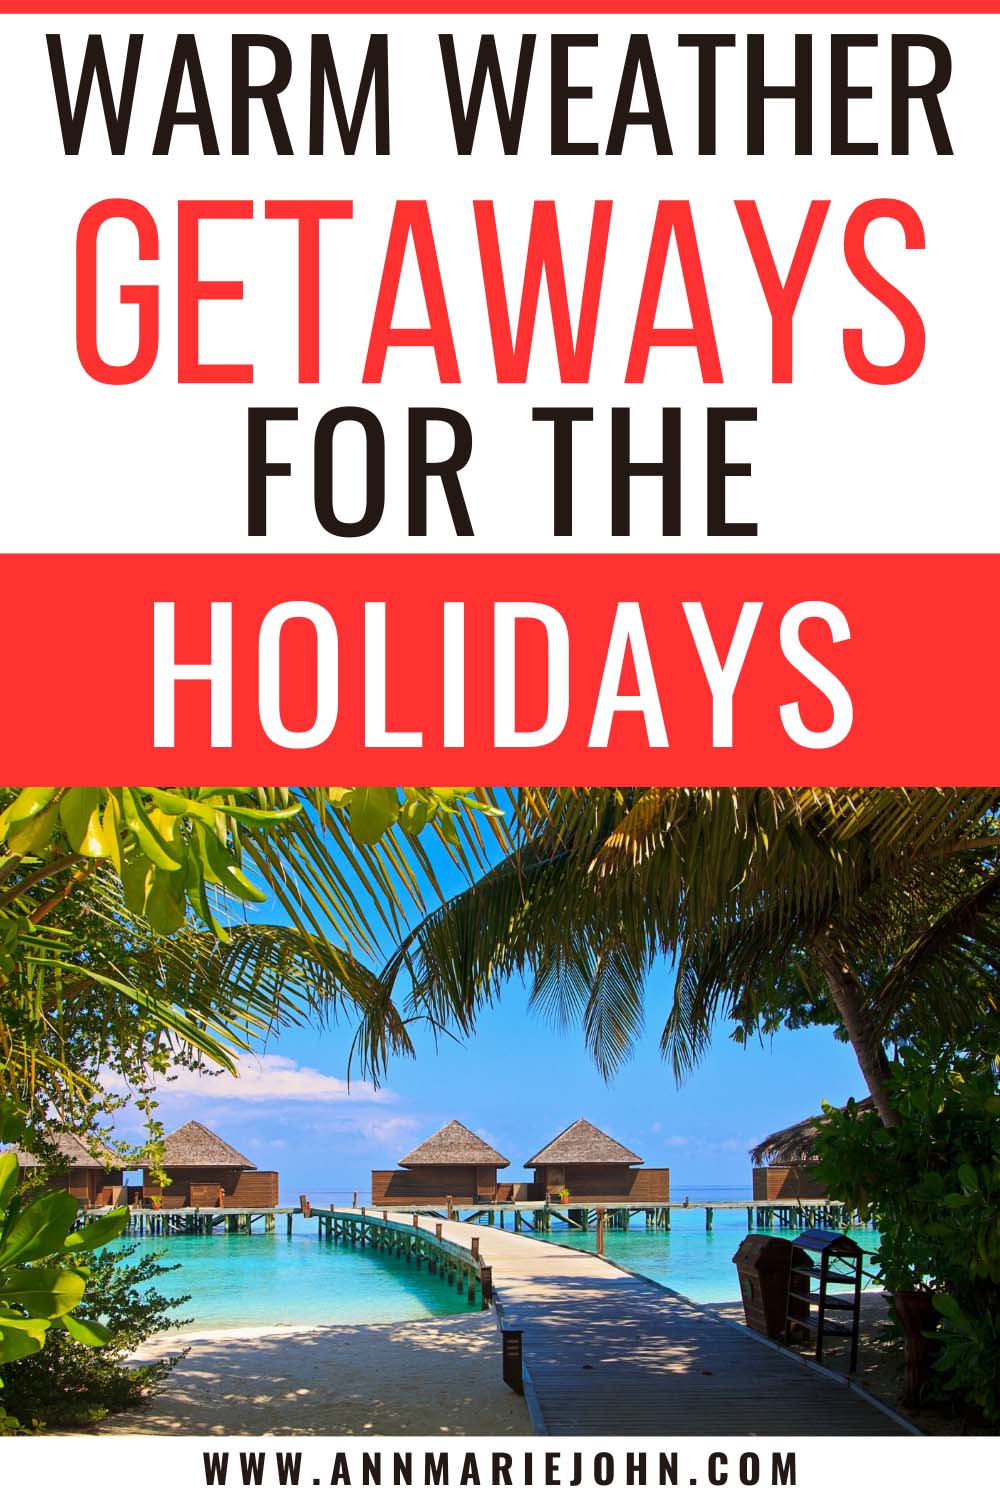 Warm Weather Getaways for the Holidays